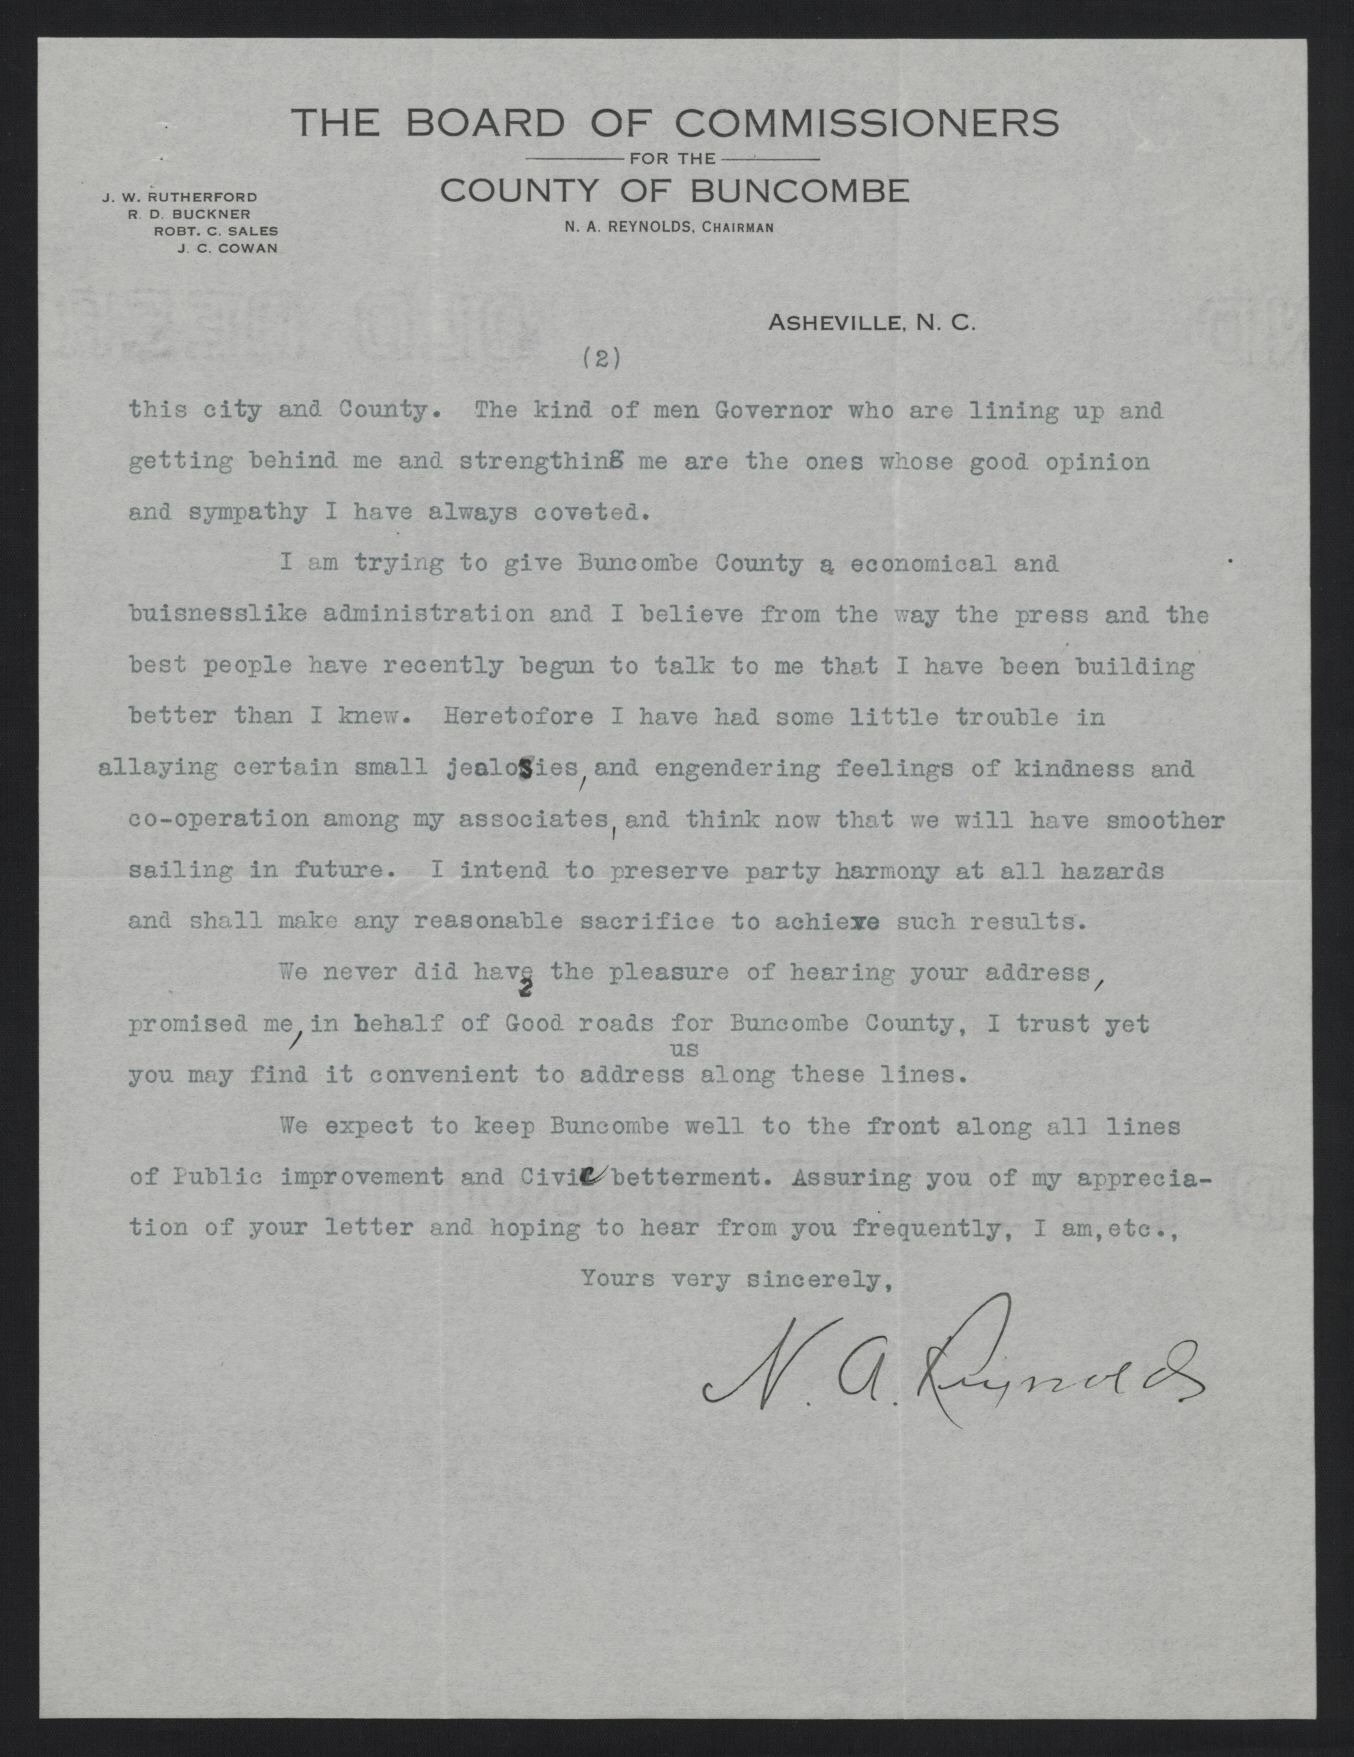 Letter from Reynolds to Craig, February 11, 1914, page 2